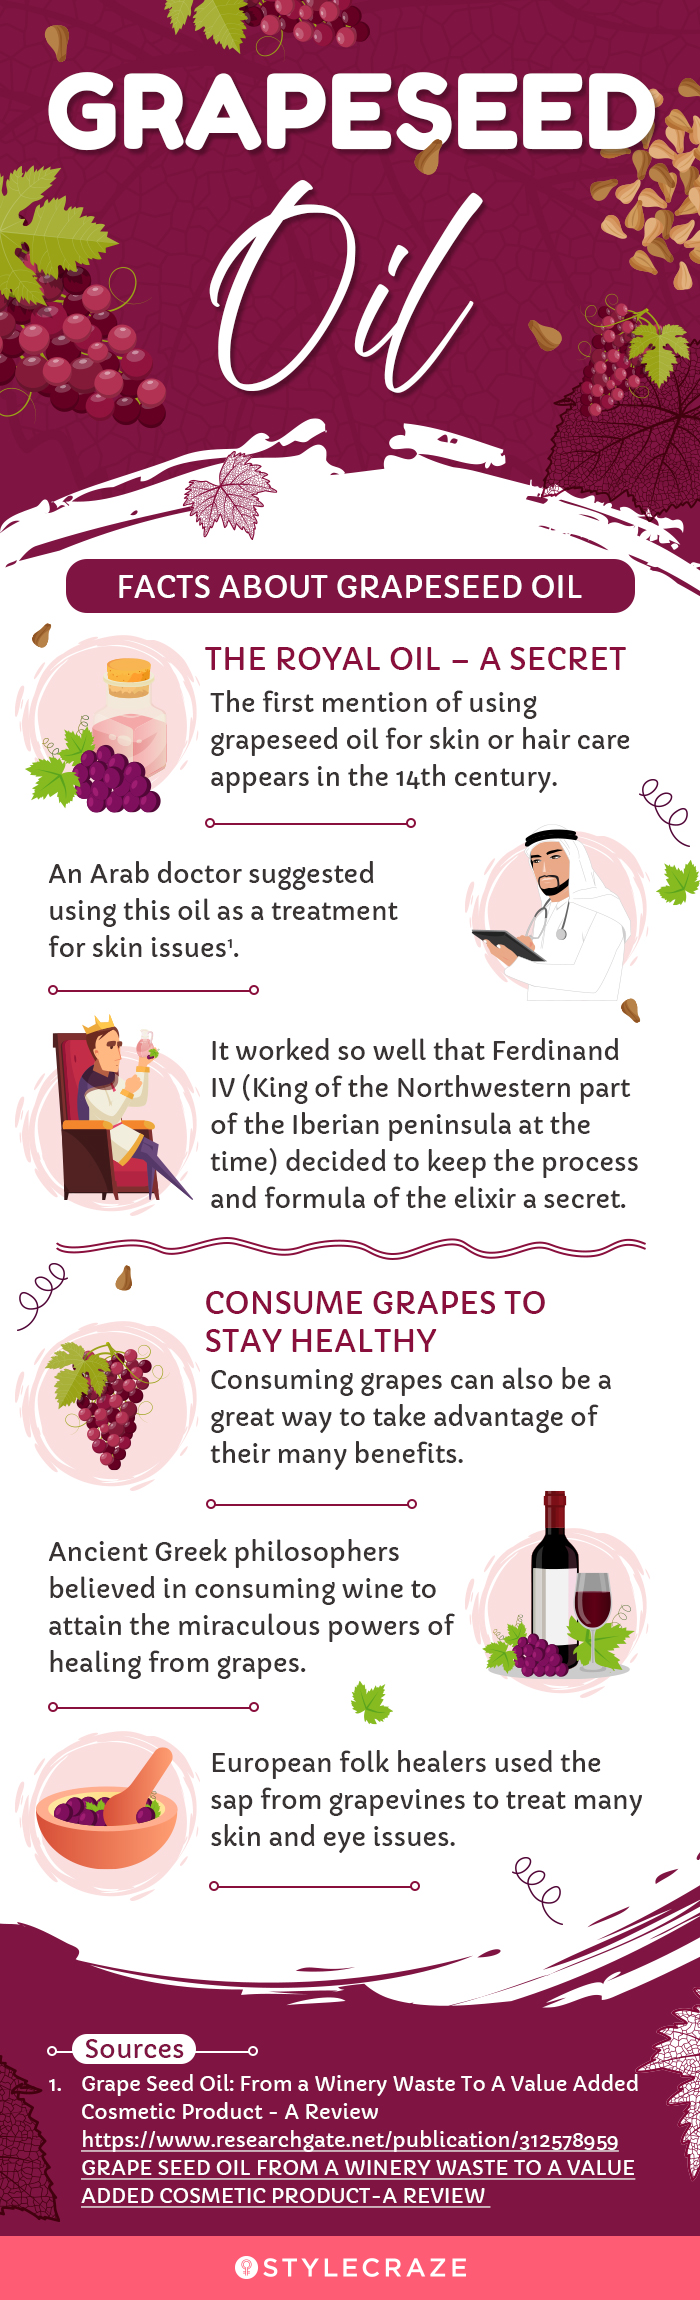 facts about grapeseed oil (infographic)